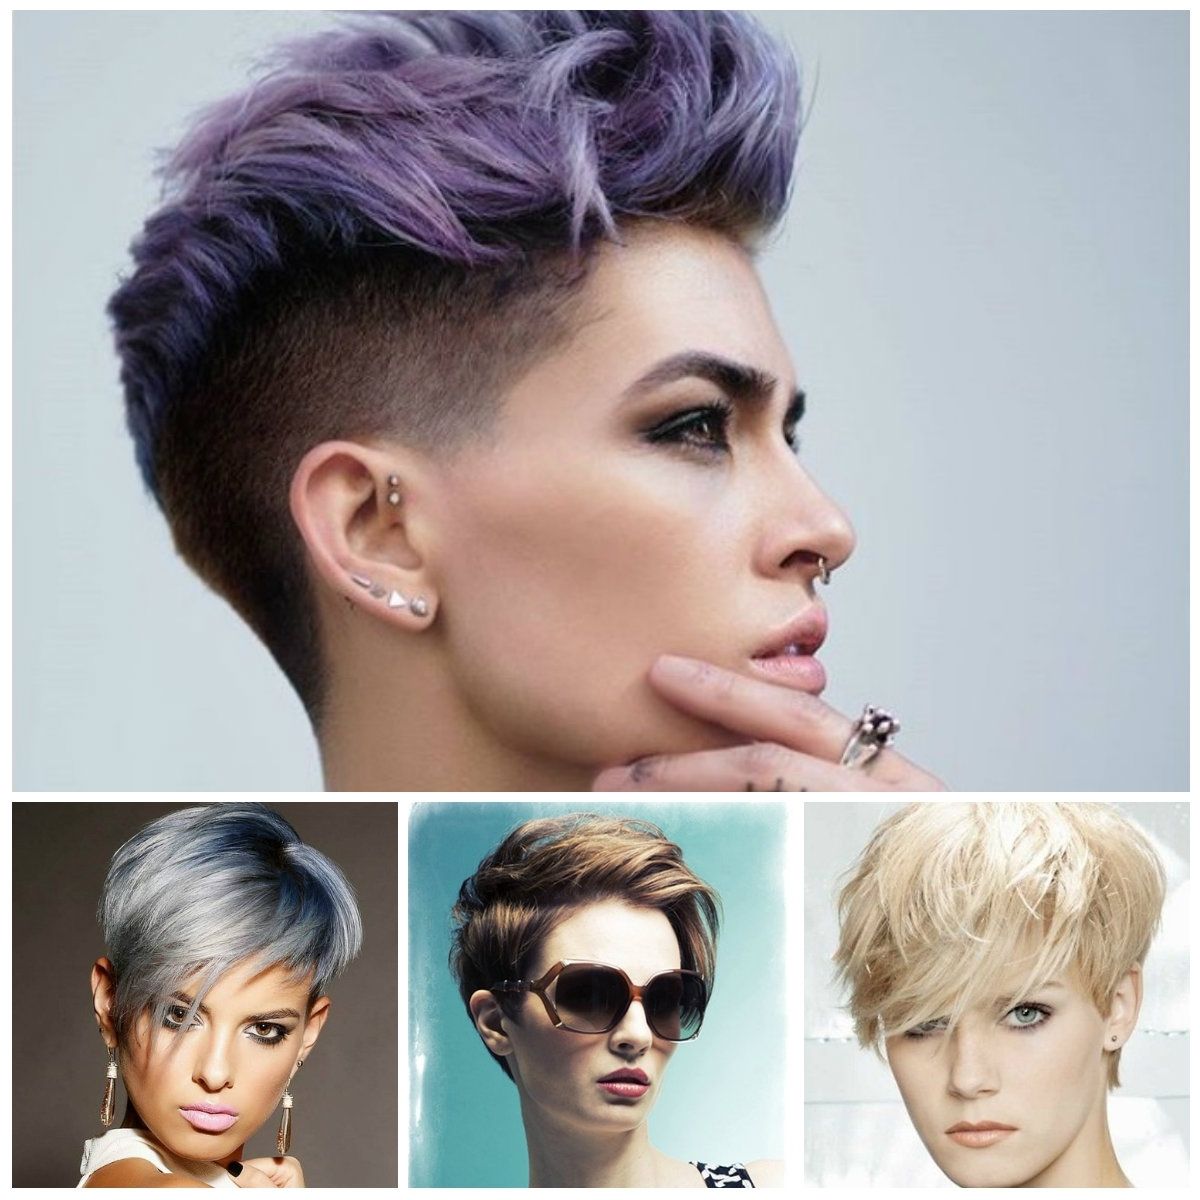 6 Hot Pixie Hairstyles – New Hairstyles 2017 For Long, Short And Throughout Recent Hot Pixie Hairstyles (View 4 of 15)